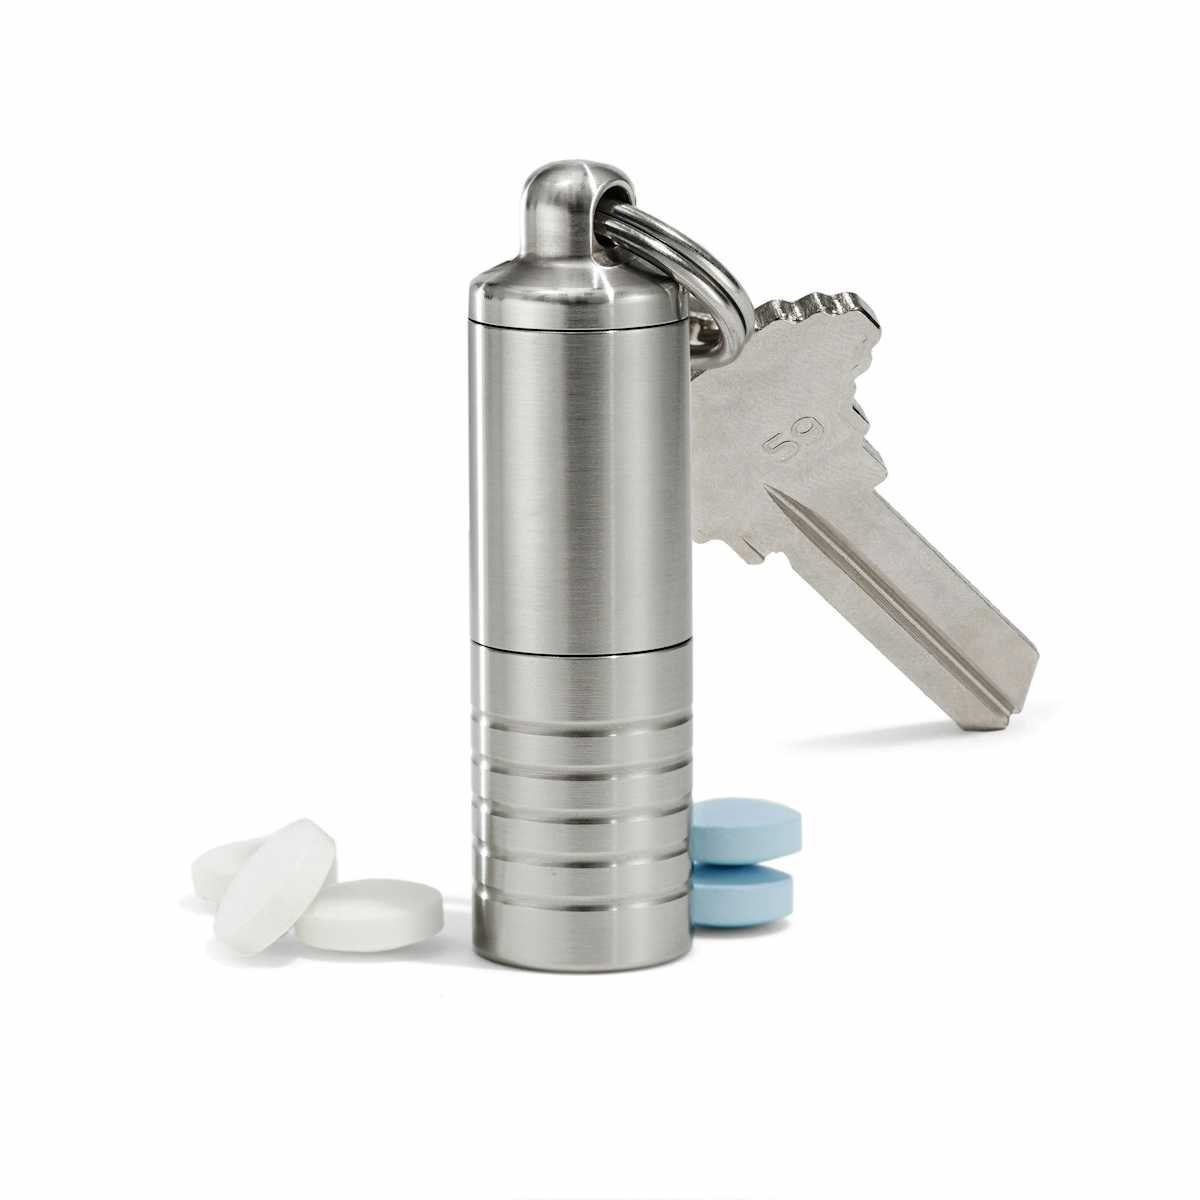 Slim Dual Chamber Keychain Pill Holder in Stainless Steel - Cielo Pill Holders